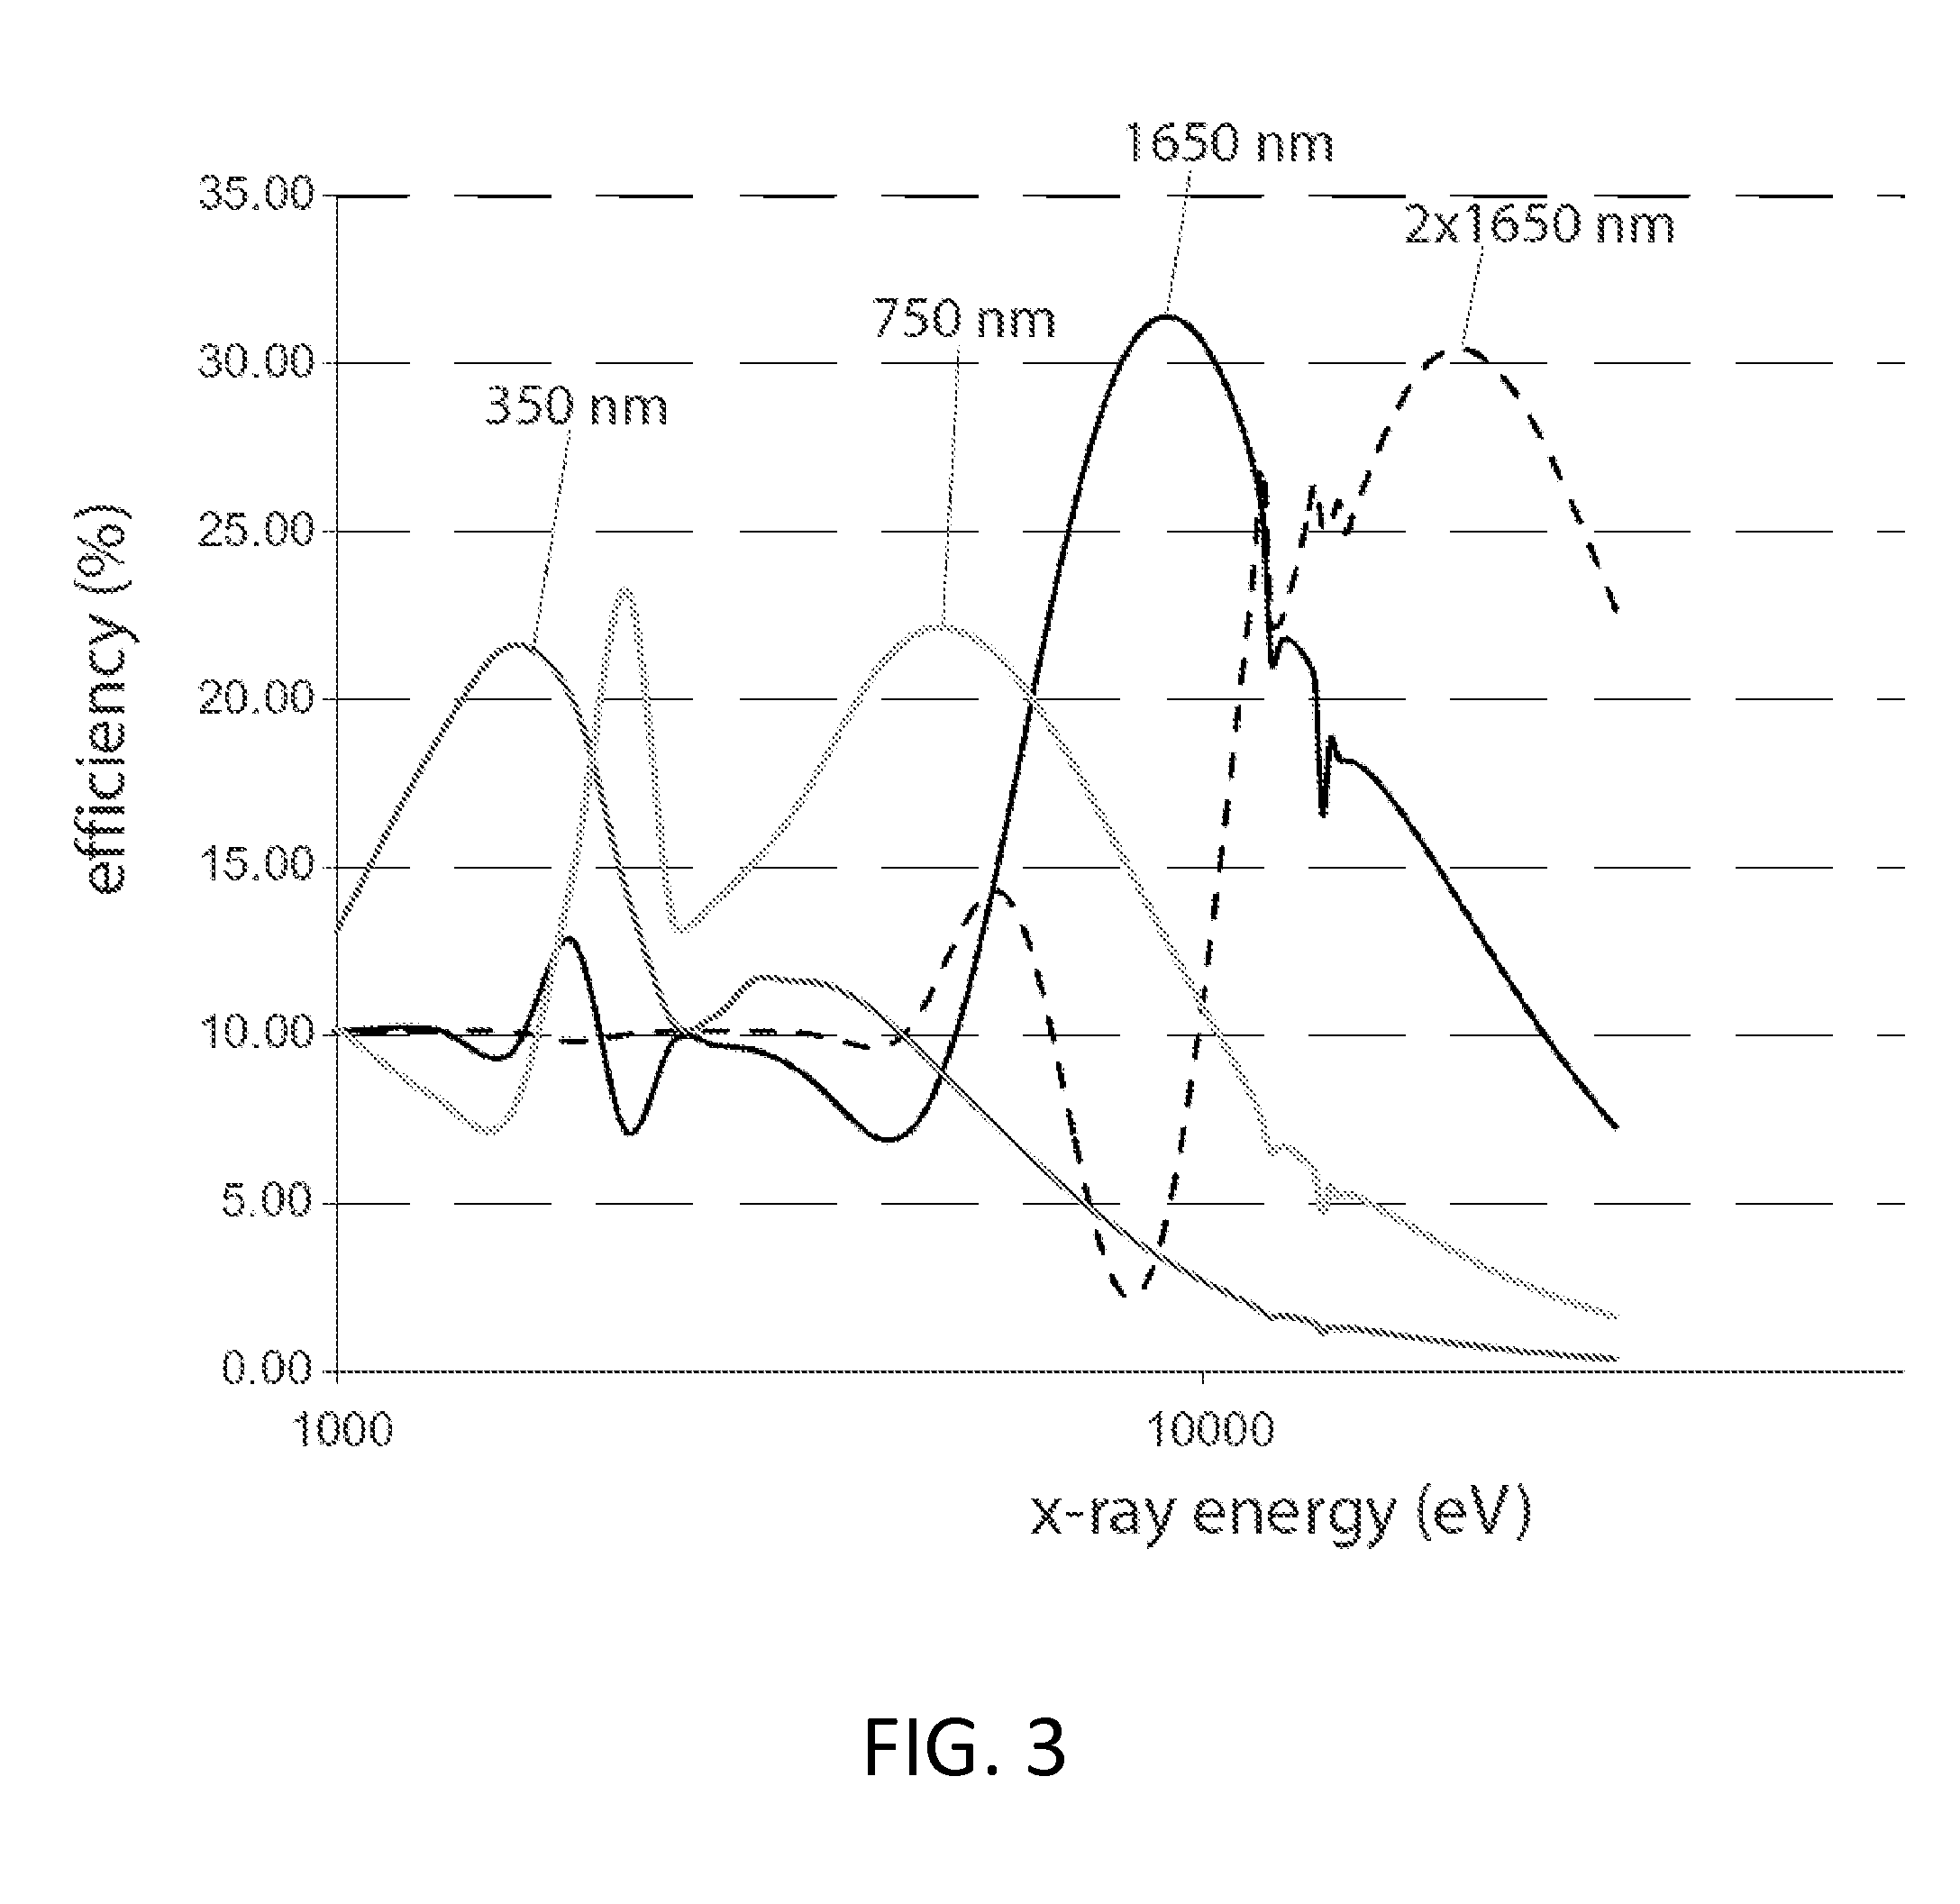 Compound X-ray lens having multiple aligned zone plates